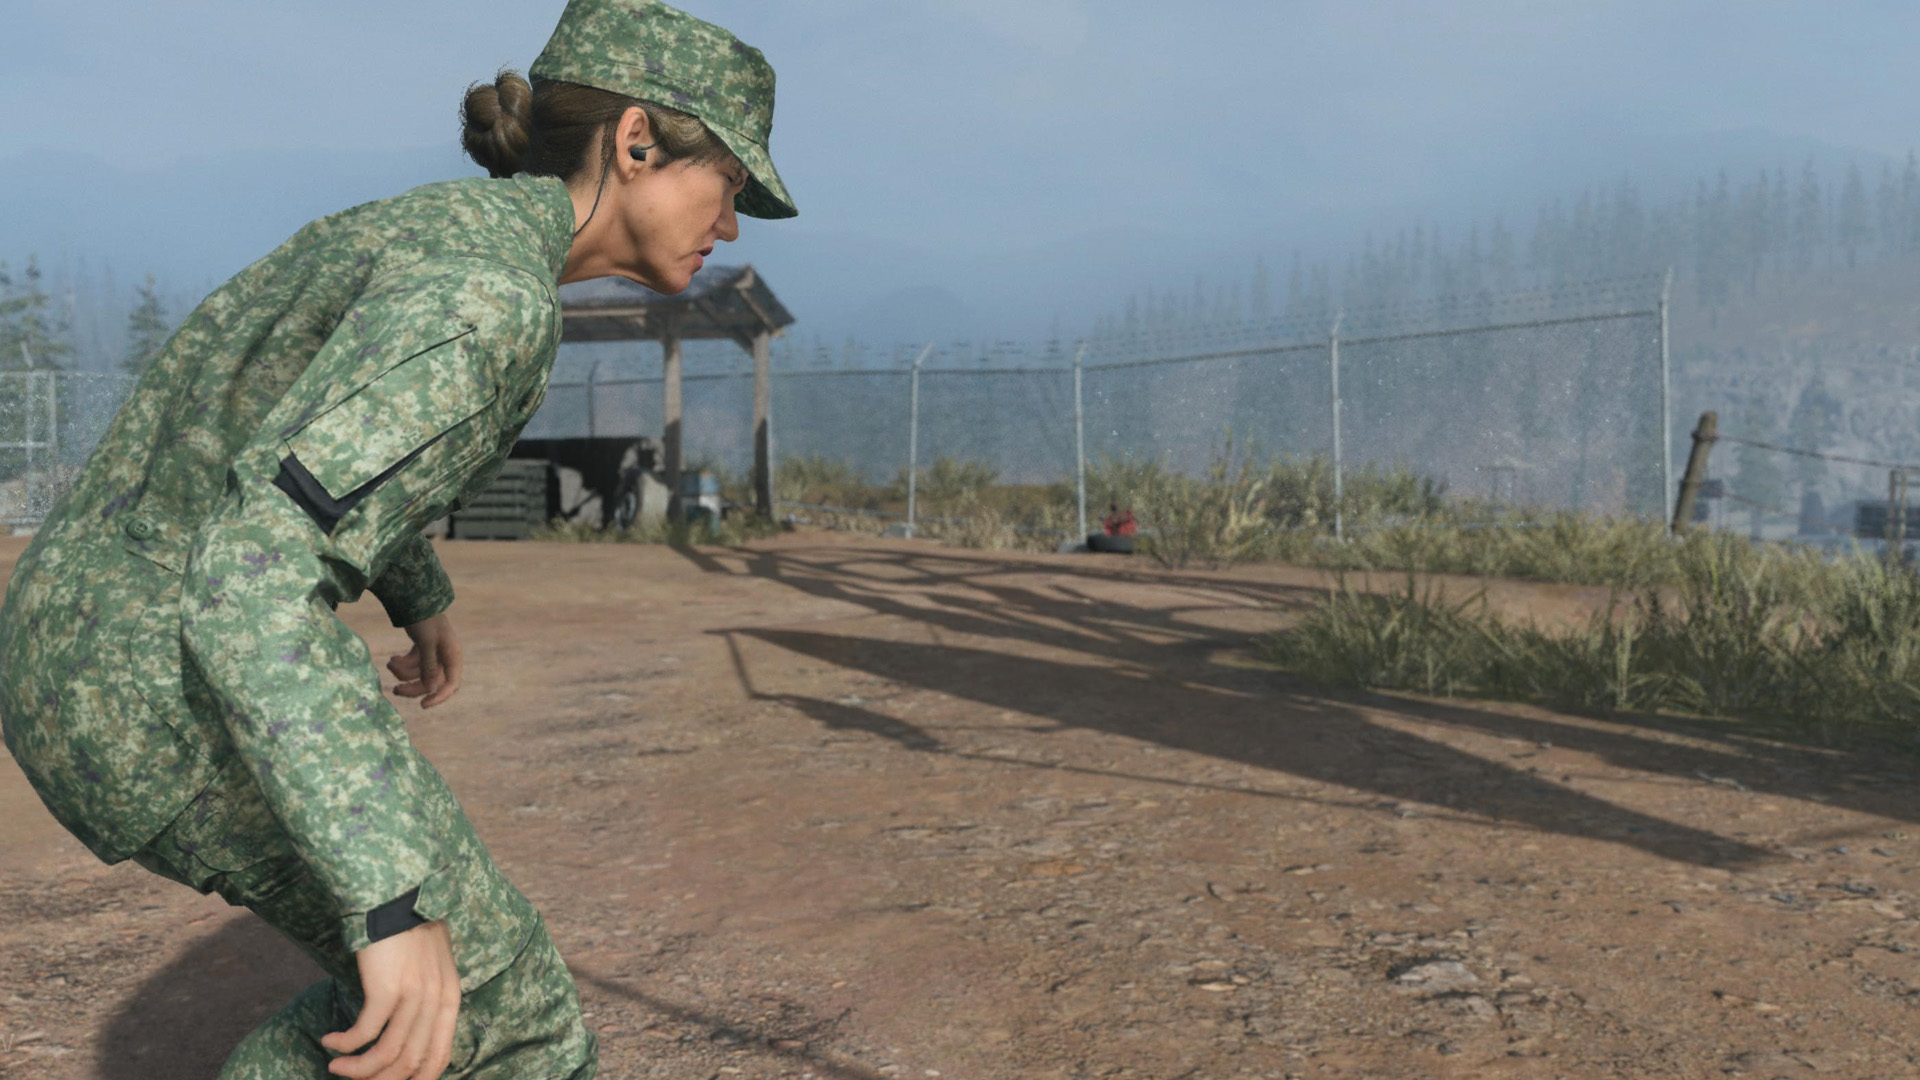 A spy sneaks toward a fence in a miitary compound during Deep Cover in MW3.